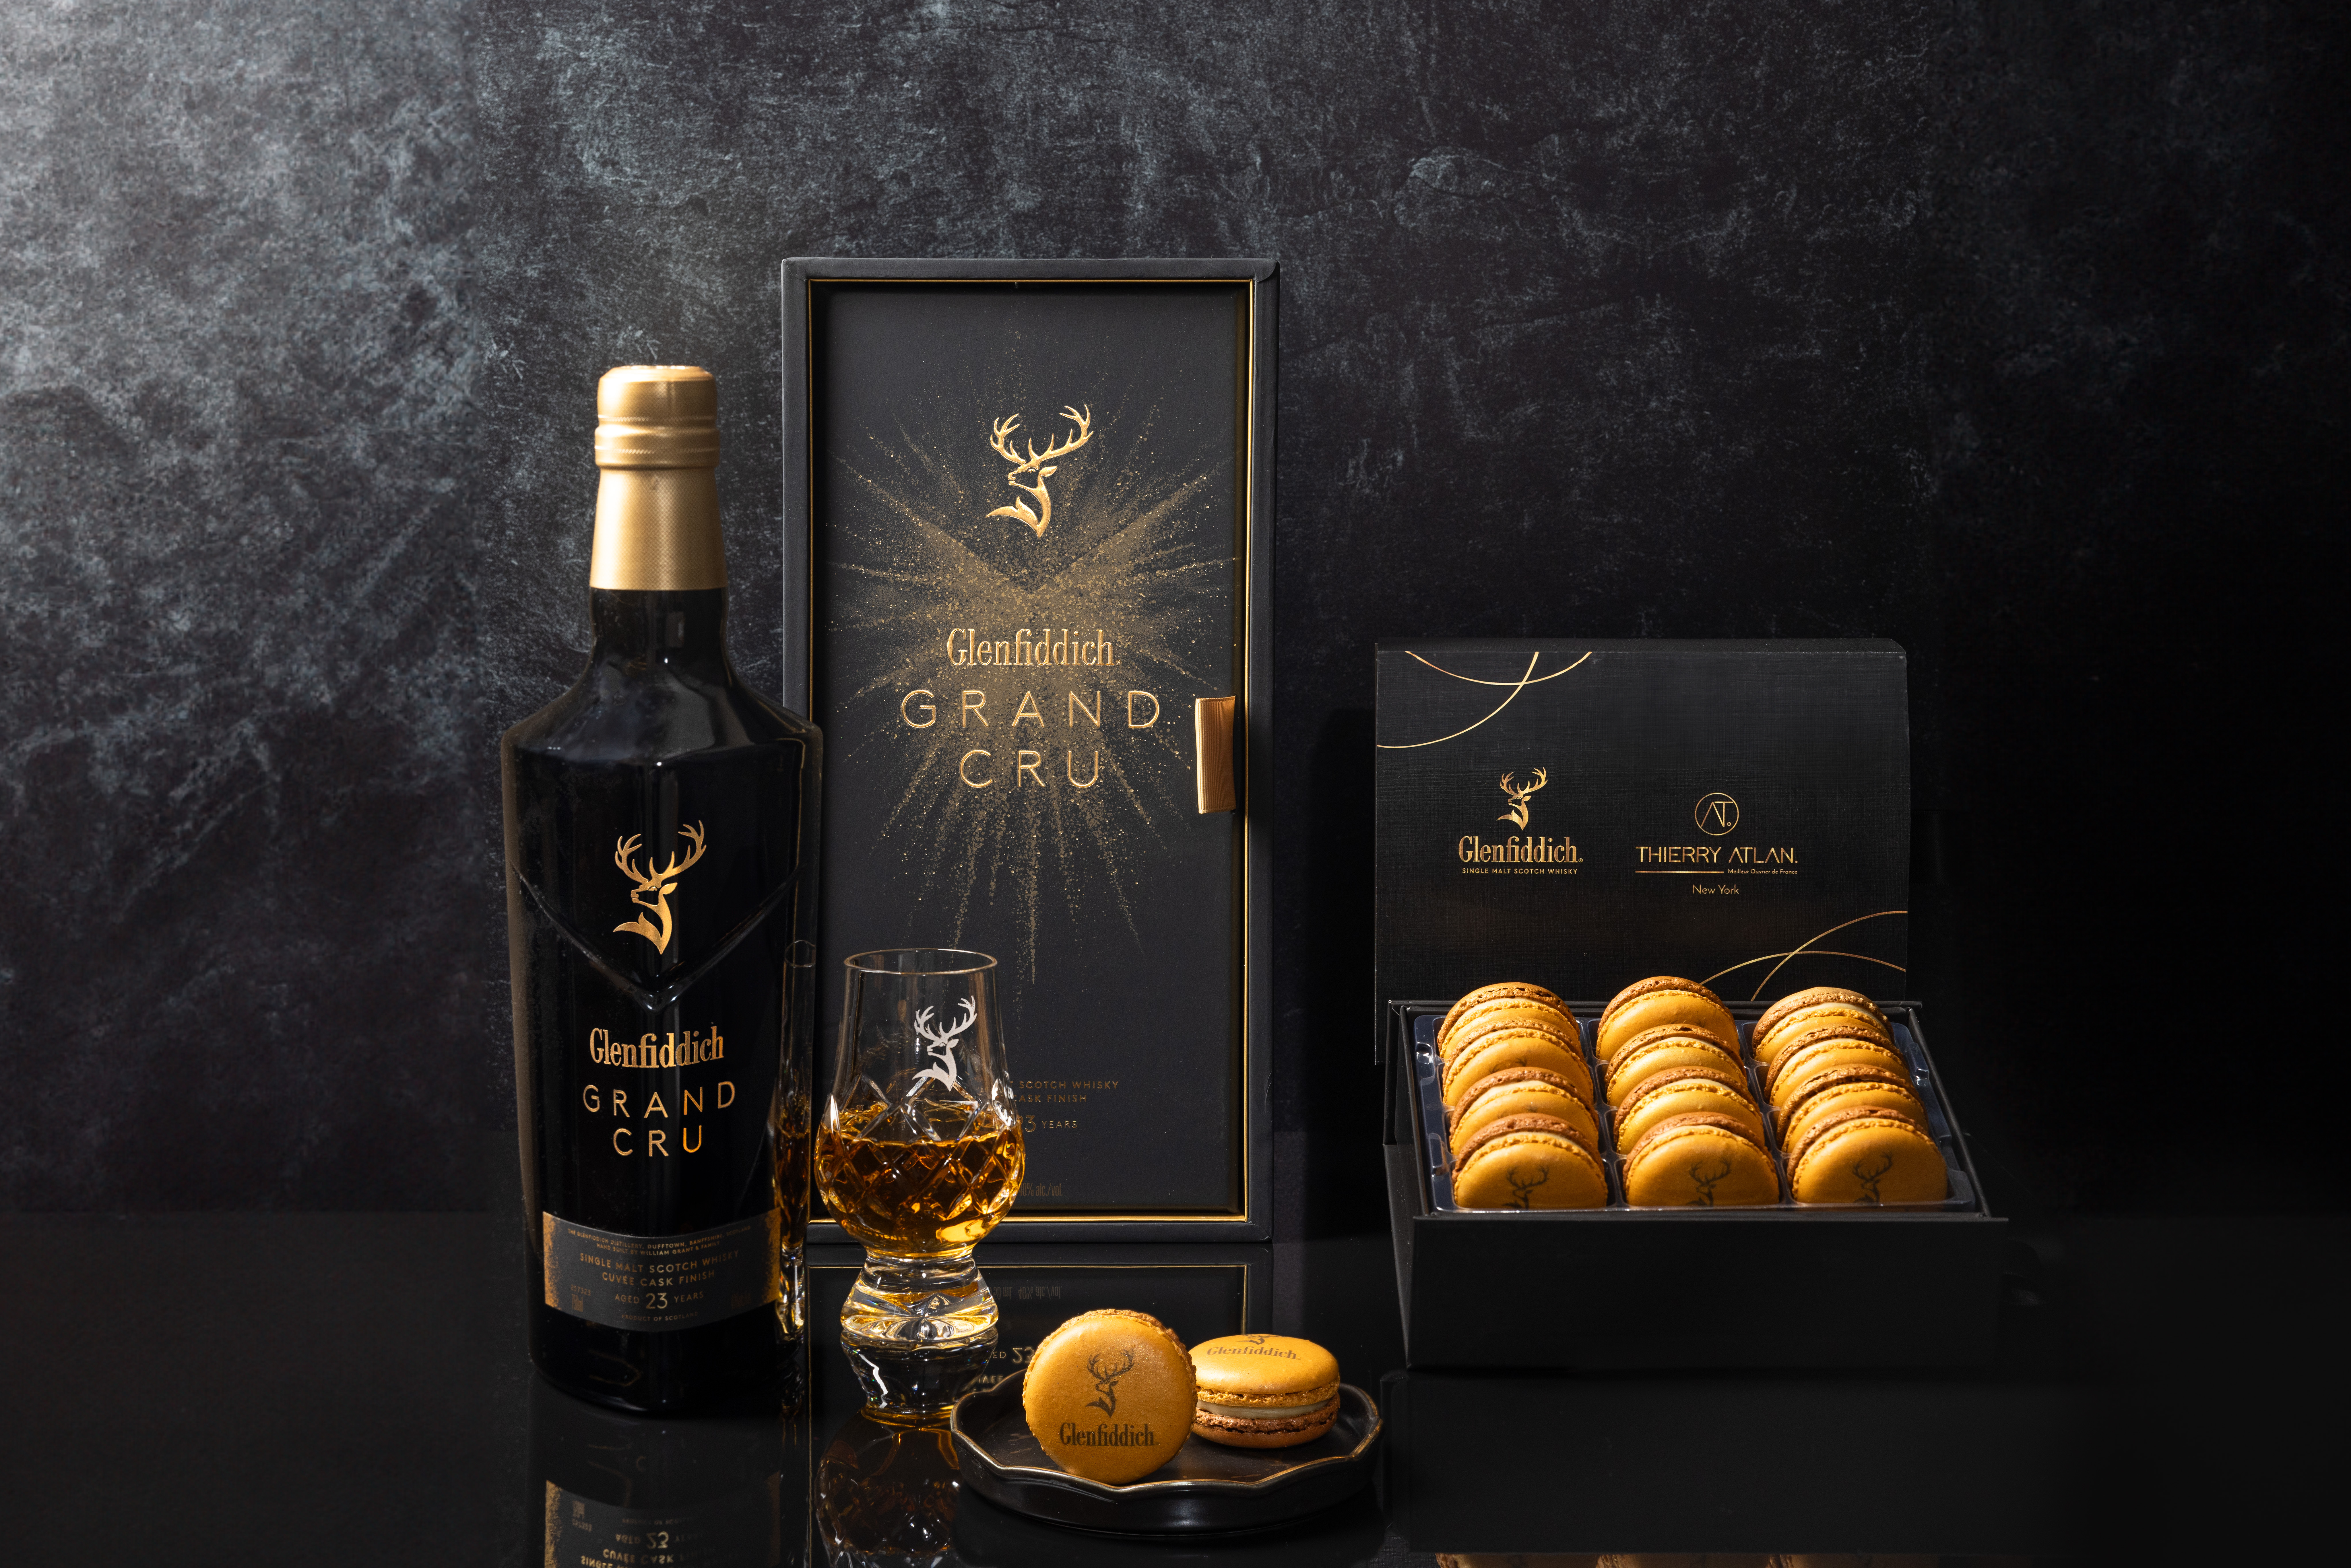 The Glenfiddich x Thierry Atlan Grand Cru Scotch Whisky-Infused Macarons